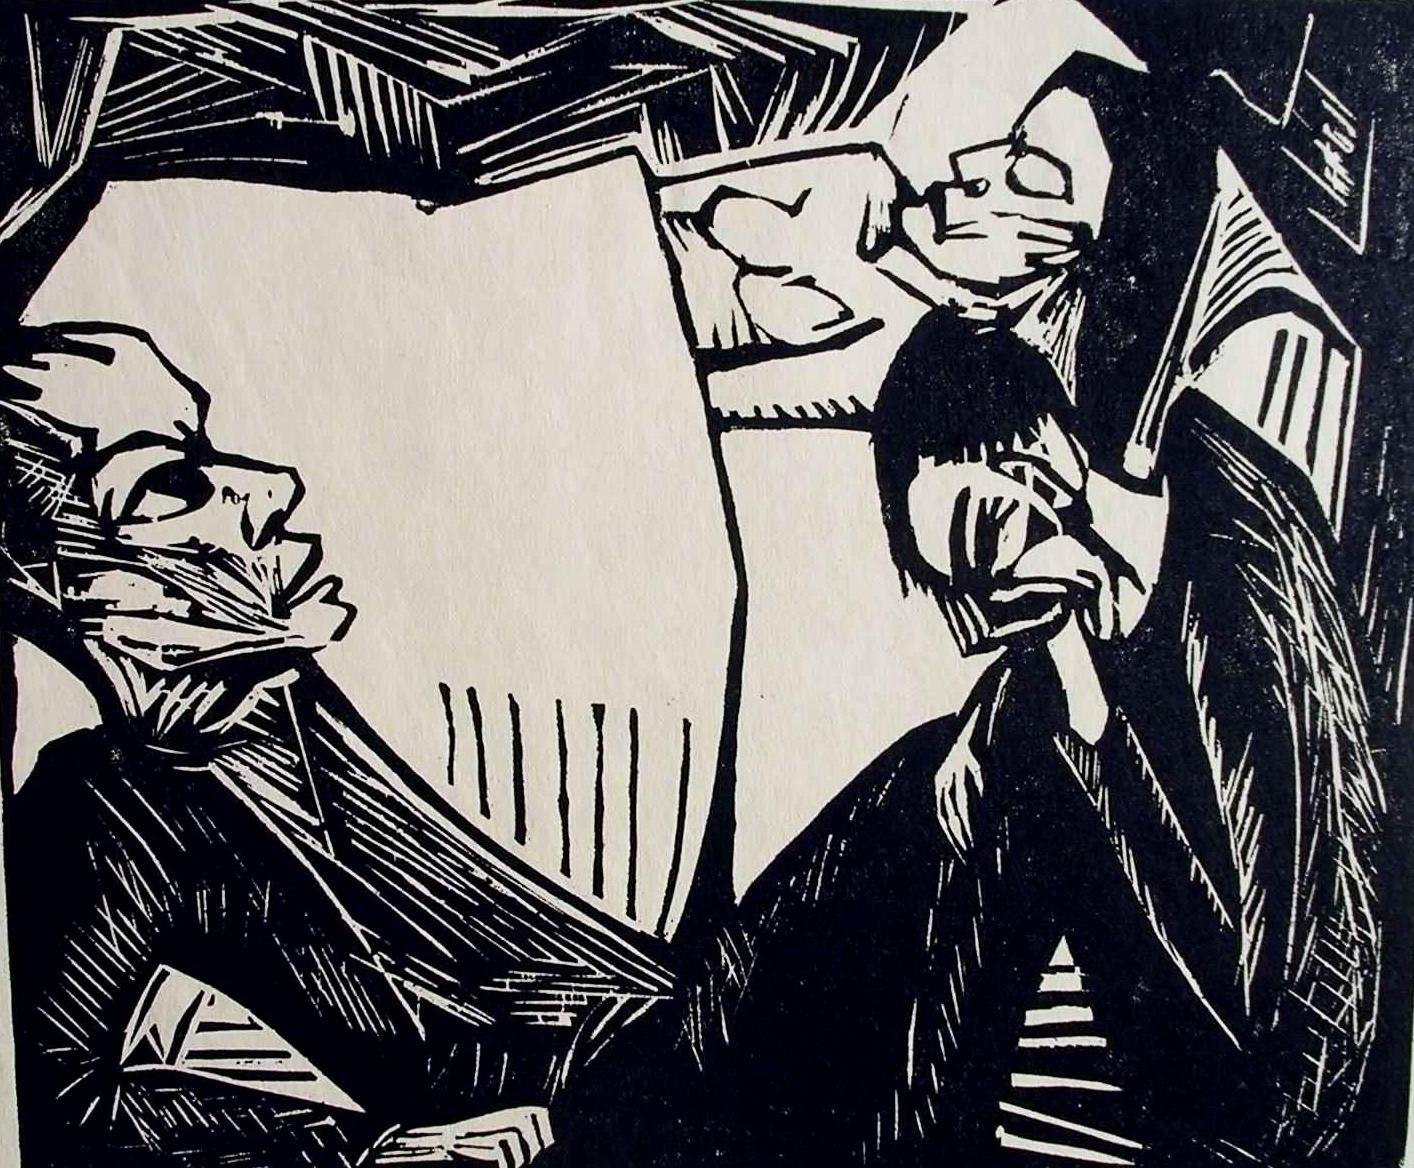 Erich Heckel (1883-1970) Original Woodblock print, 1919. 
“Dostoevski's Idiot (Final Scene)”
Unframed and in excellent condition. 
Image size: 9 3/4